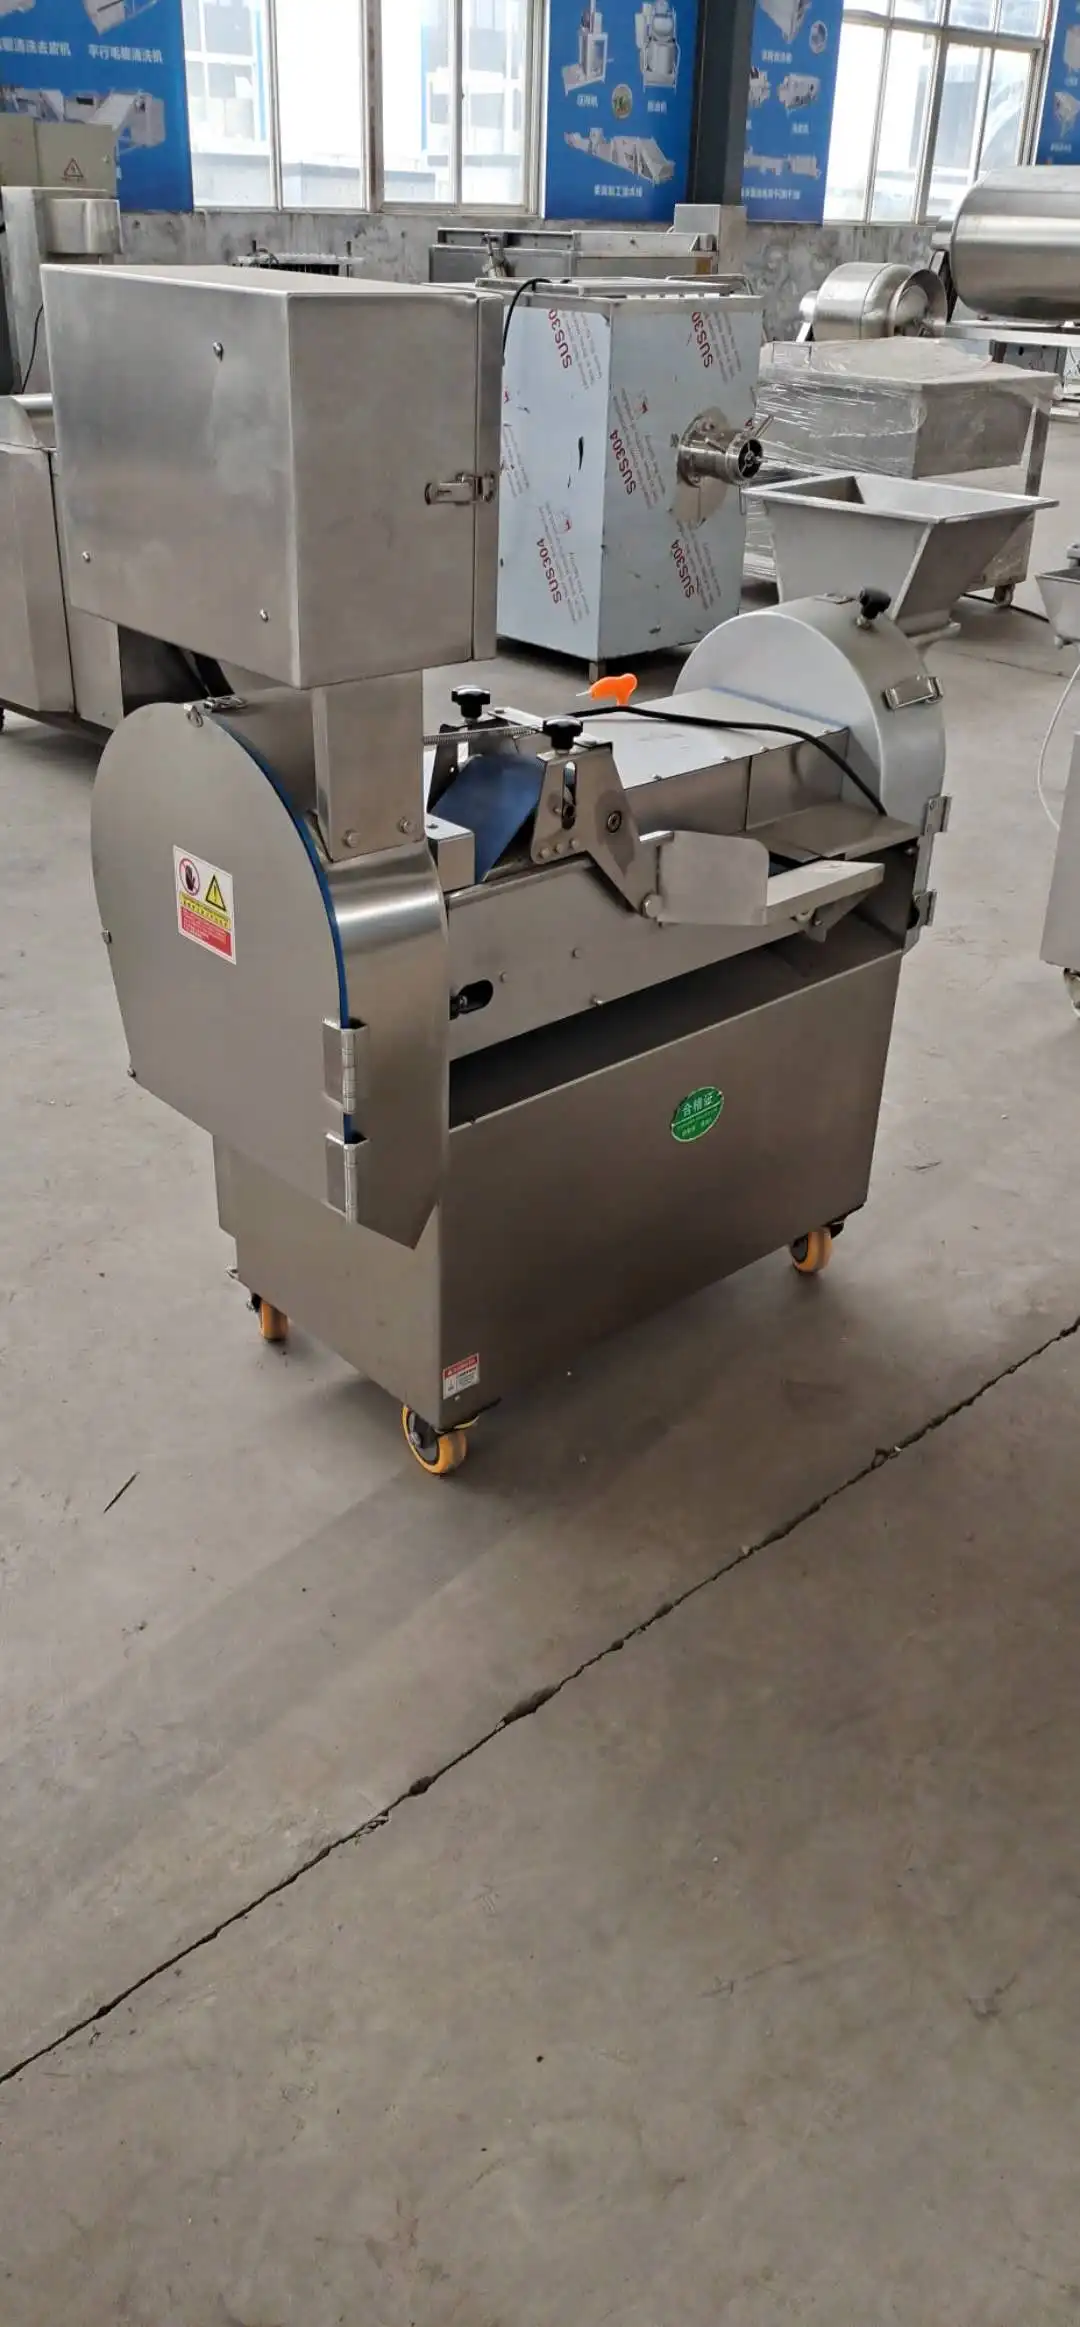 
Electric Vegetables and Fruits Dicing Shredding Machine 